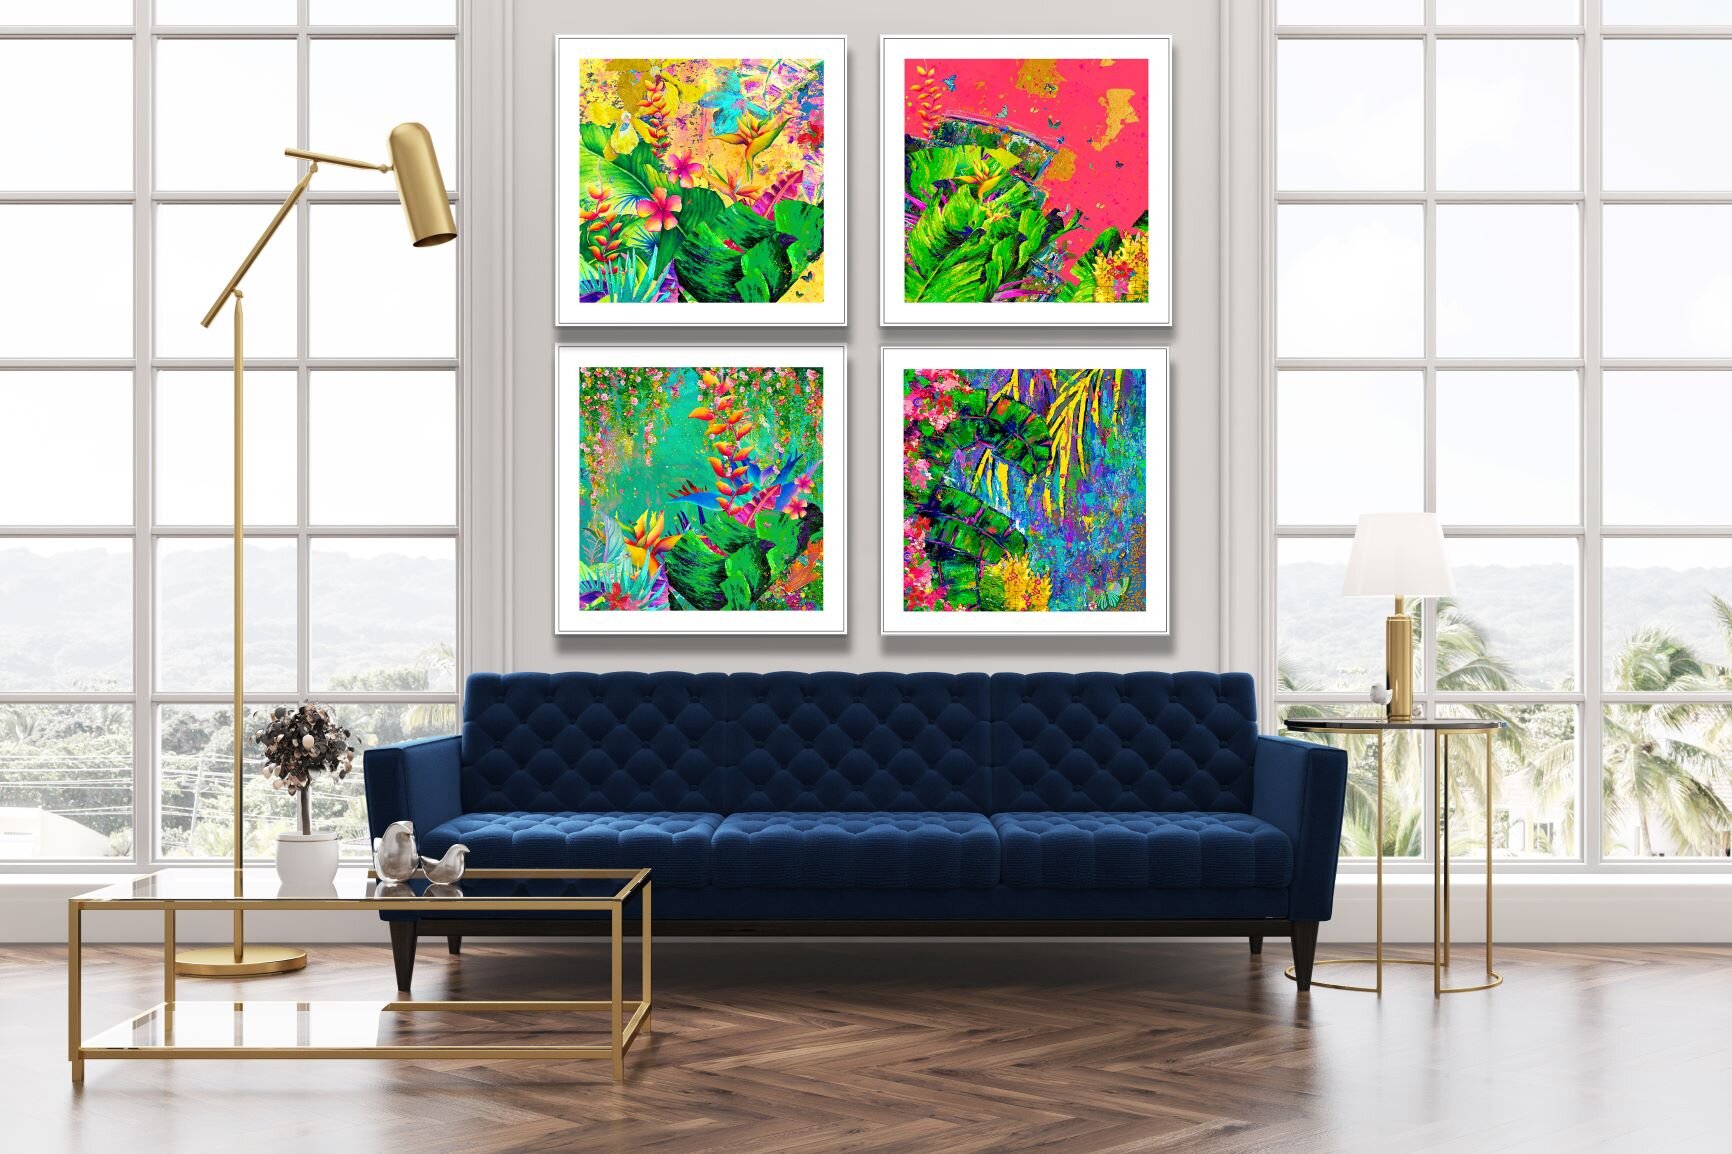 Quadriptych_Passion Love Dream Trust_Blue Couch.jpg